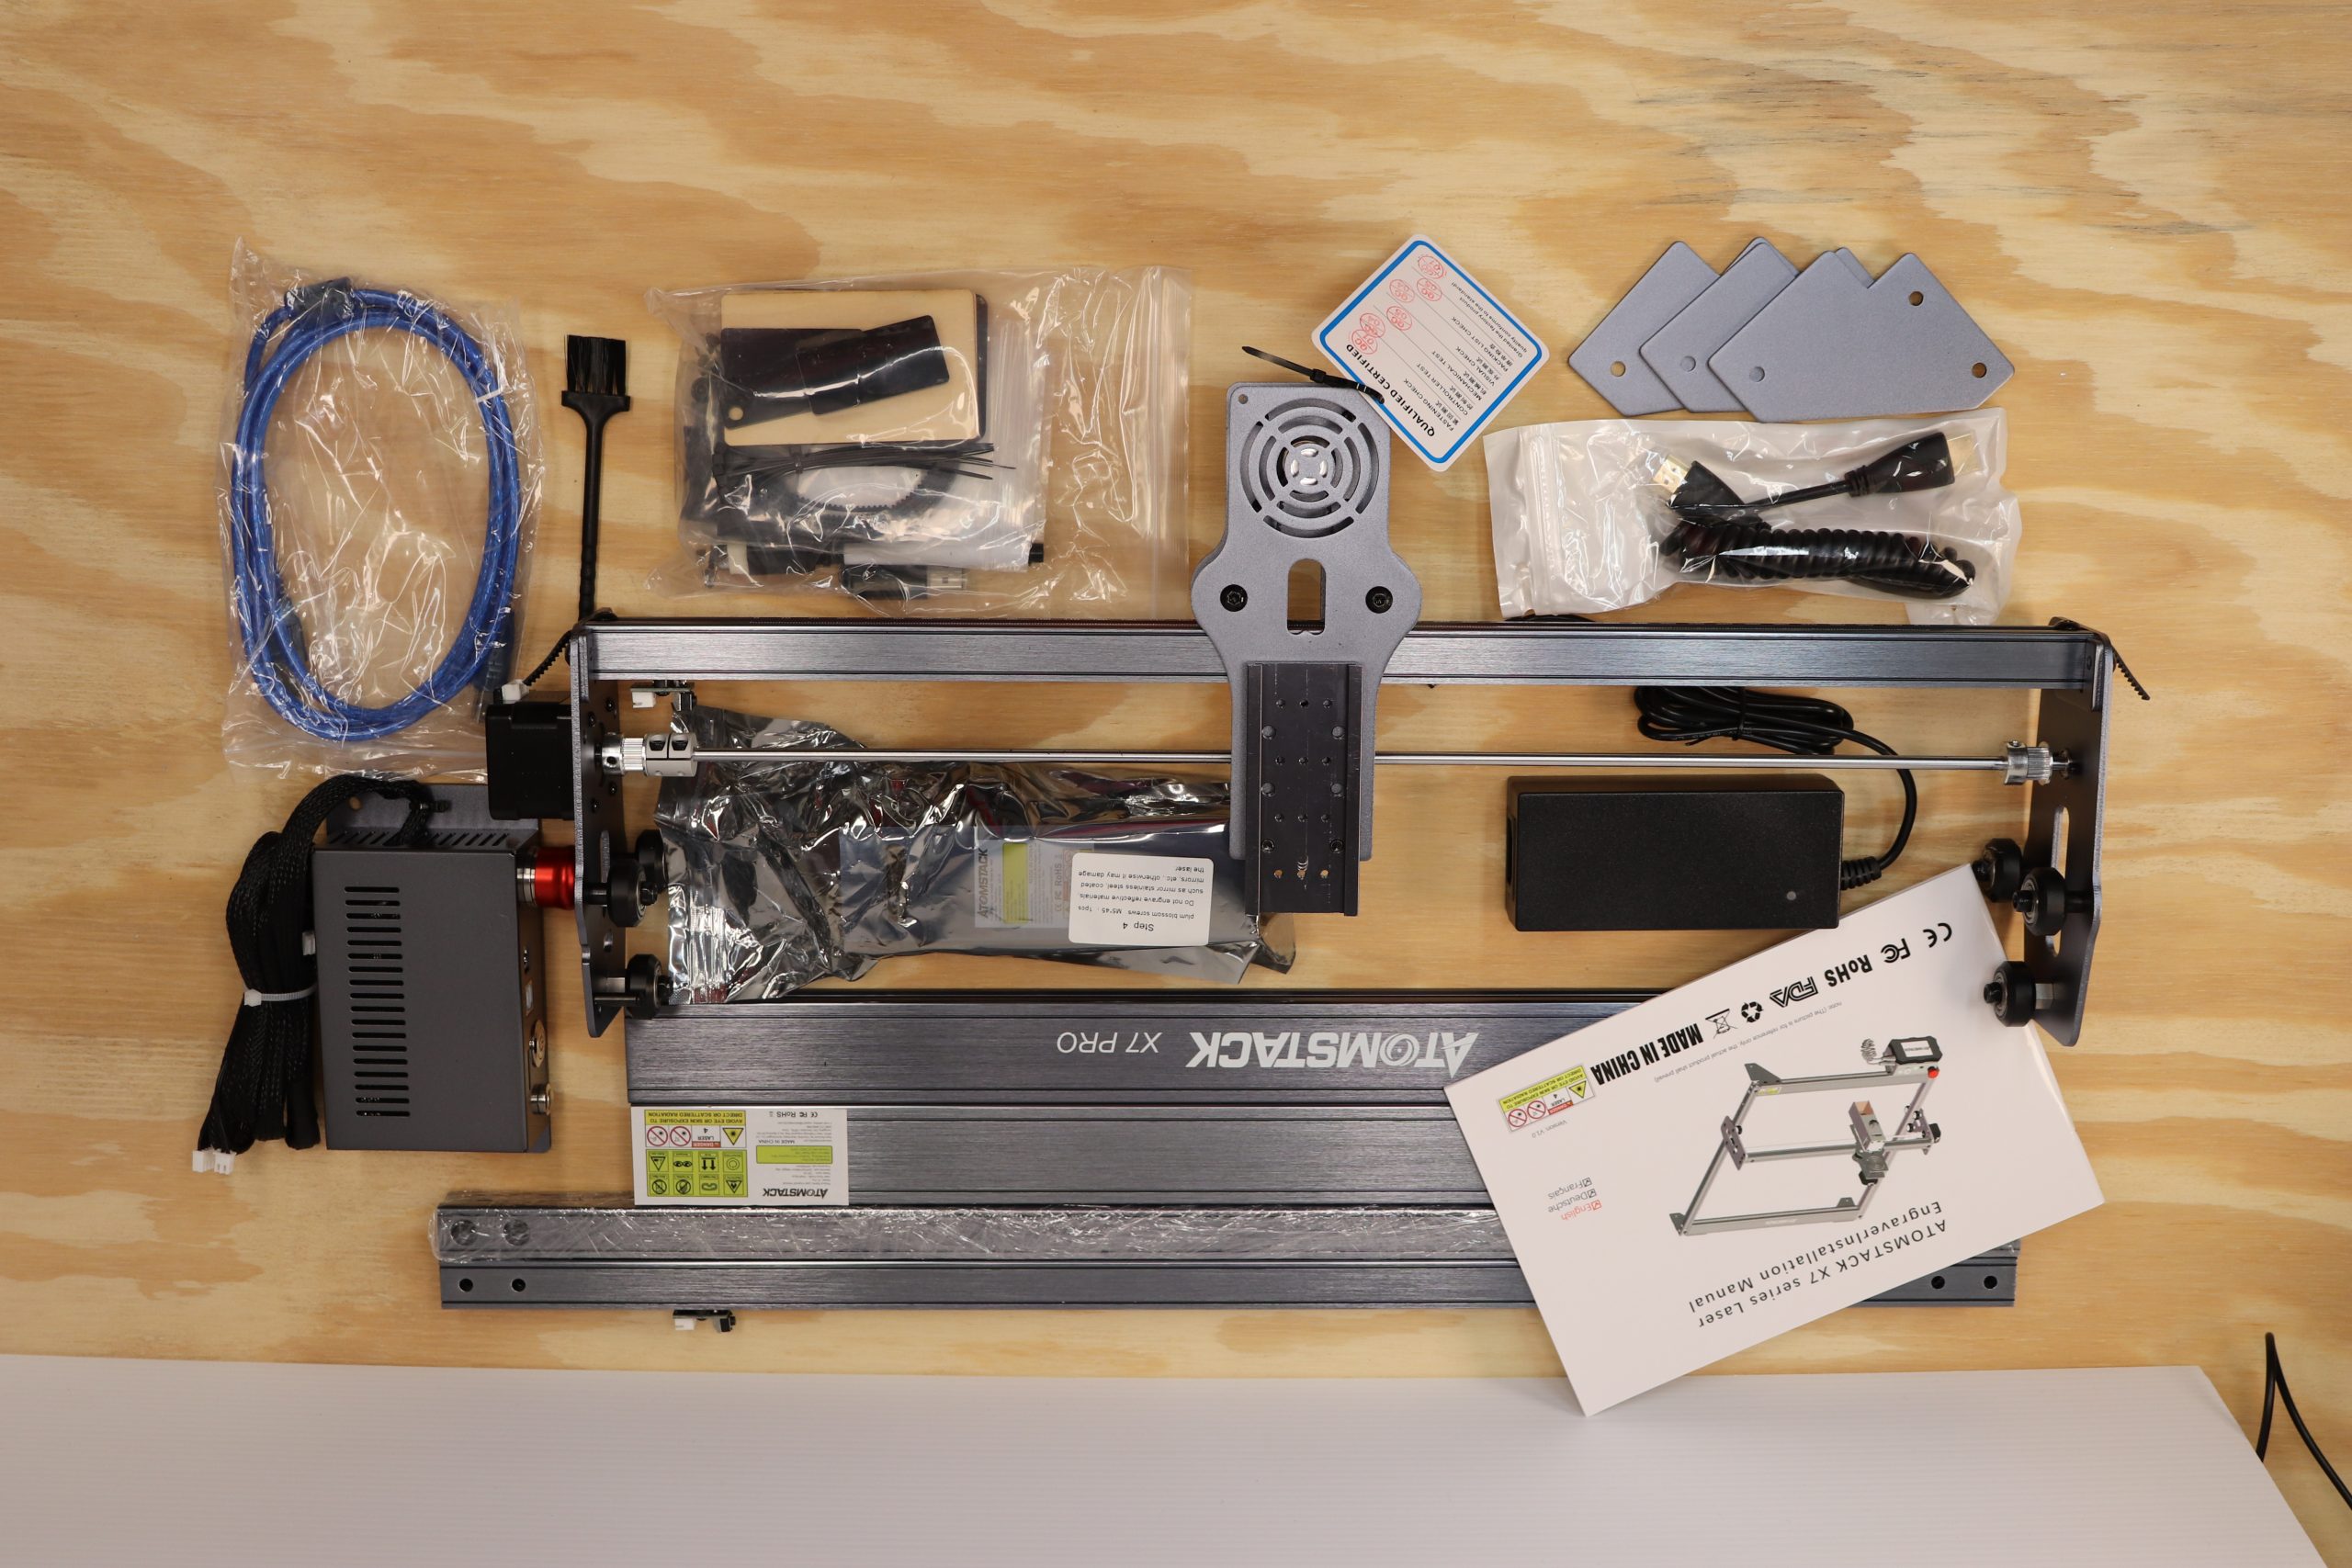 Atomstack X7 Pro Jewelry Wood Laser Engraver-Make Your Carving Better